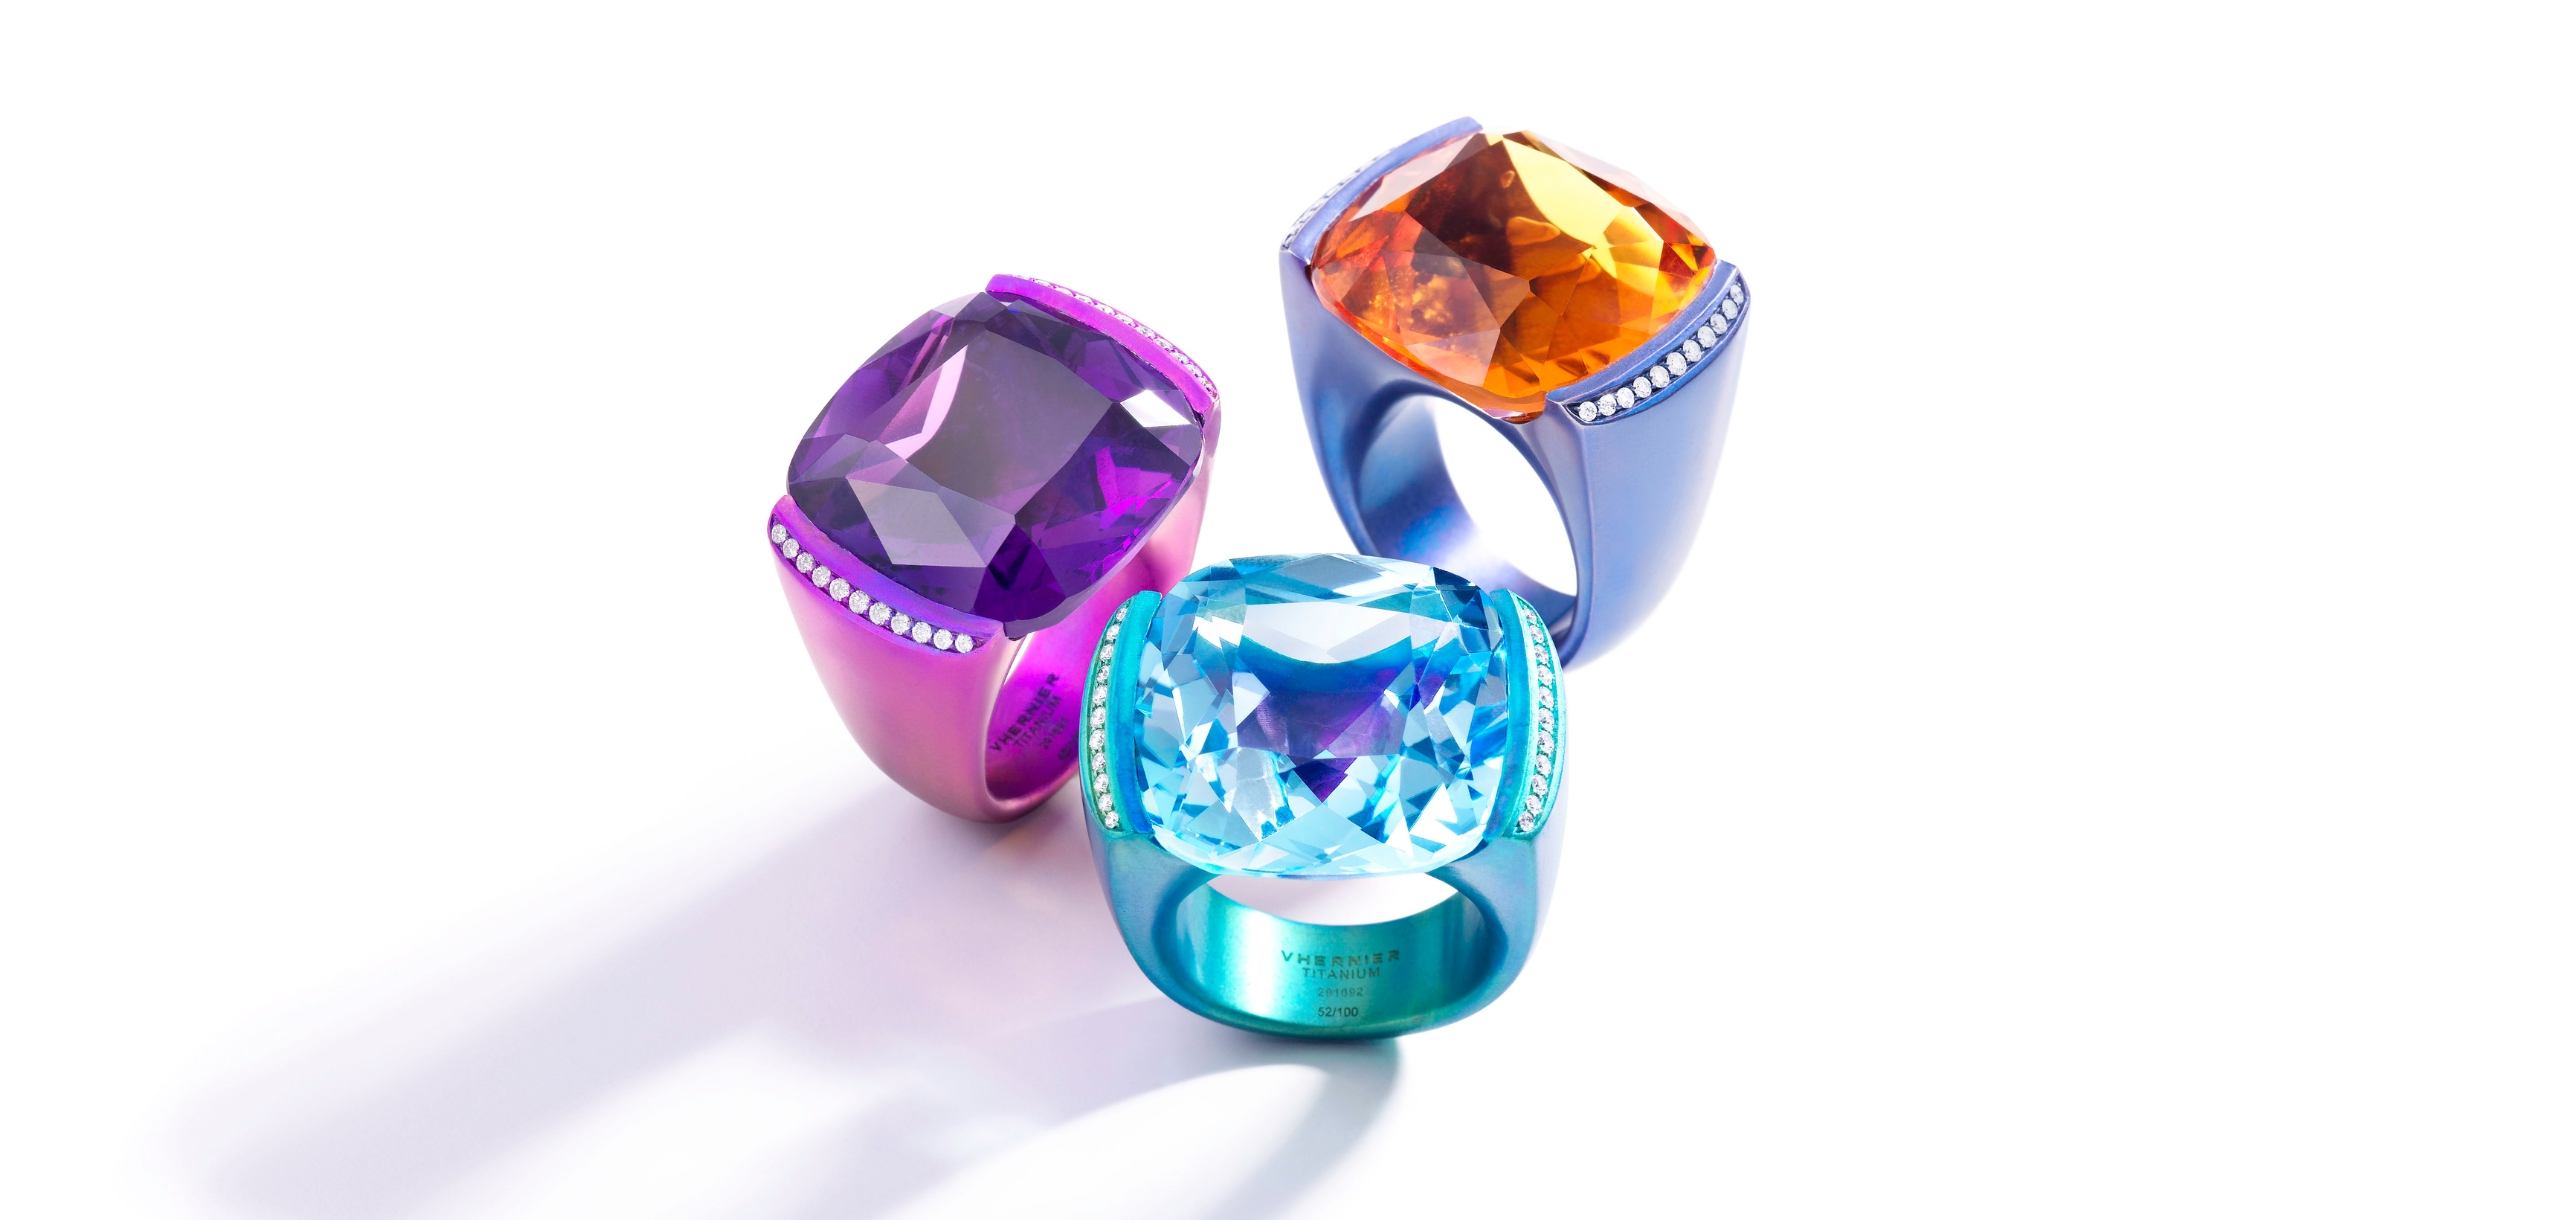 Trio of cocktails rings in purple, blue, and turquoise colored titanium and stones